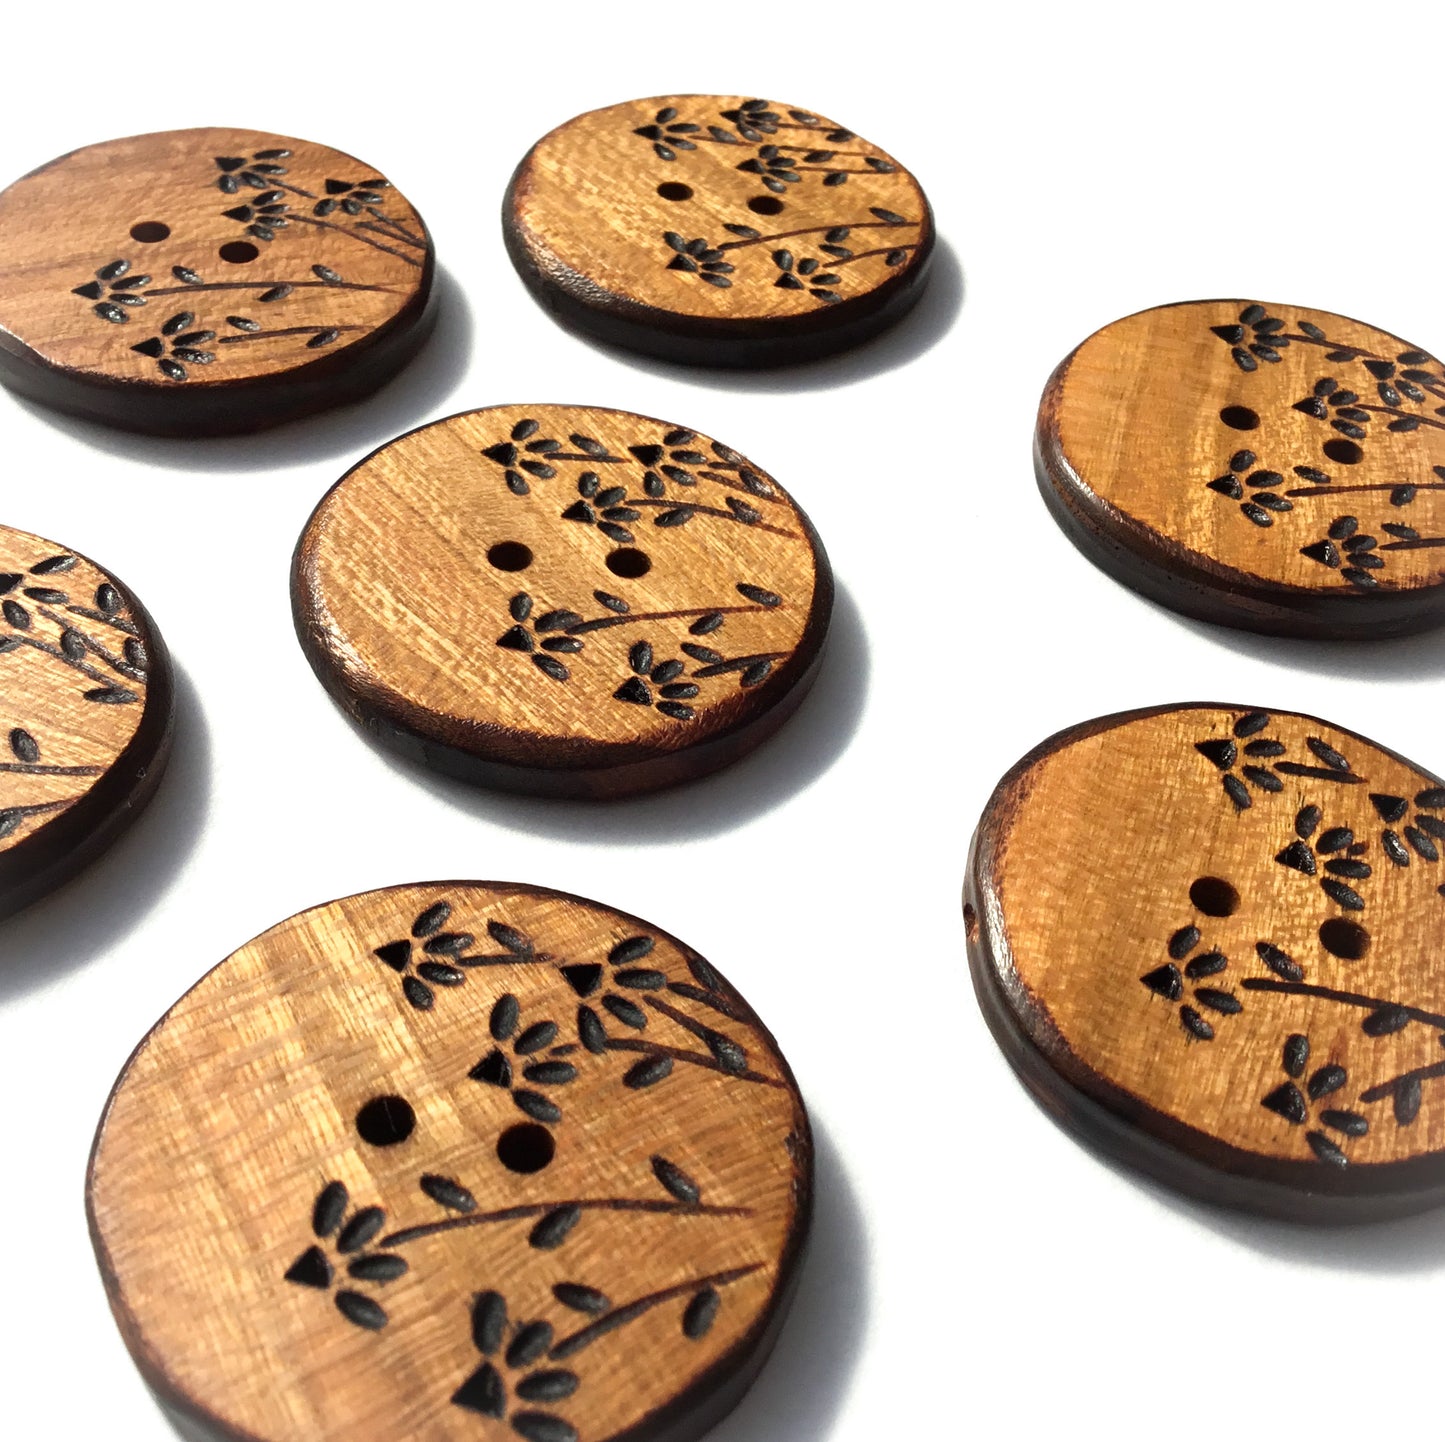 Wood Burned Coneflower Button in Cherry  1-1/2”